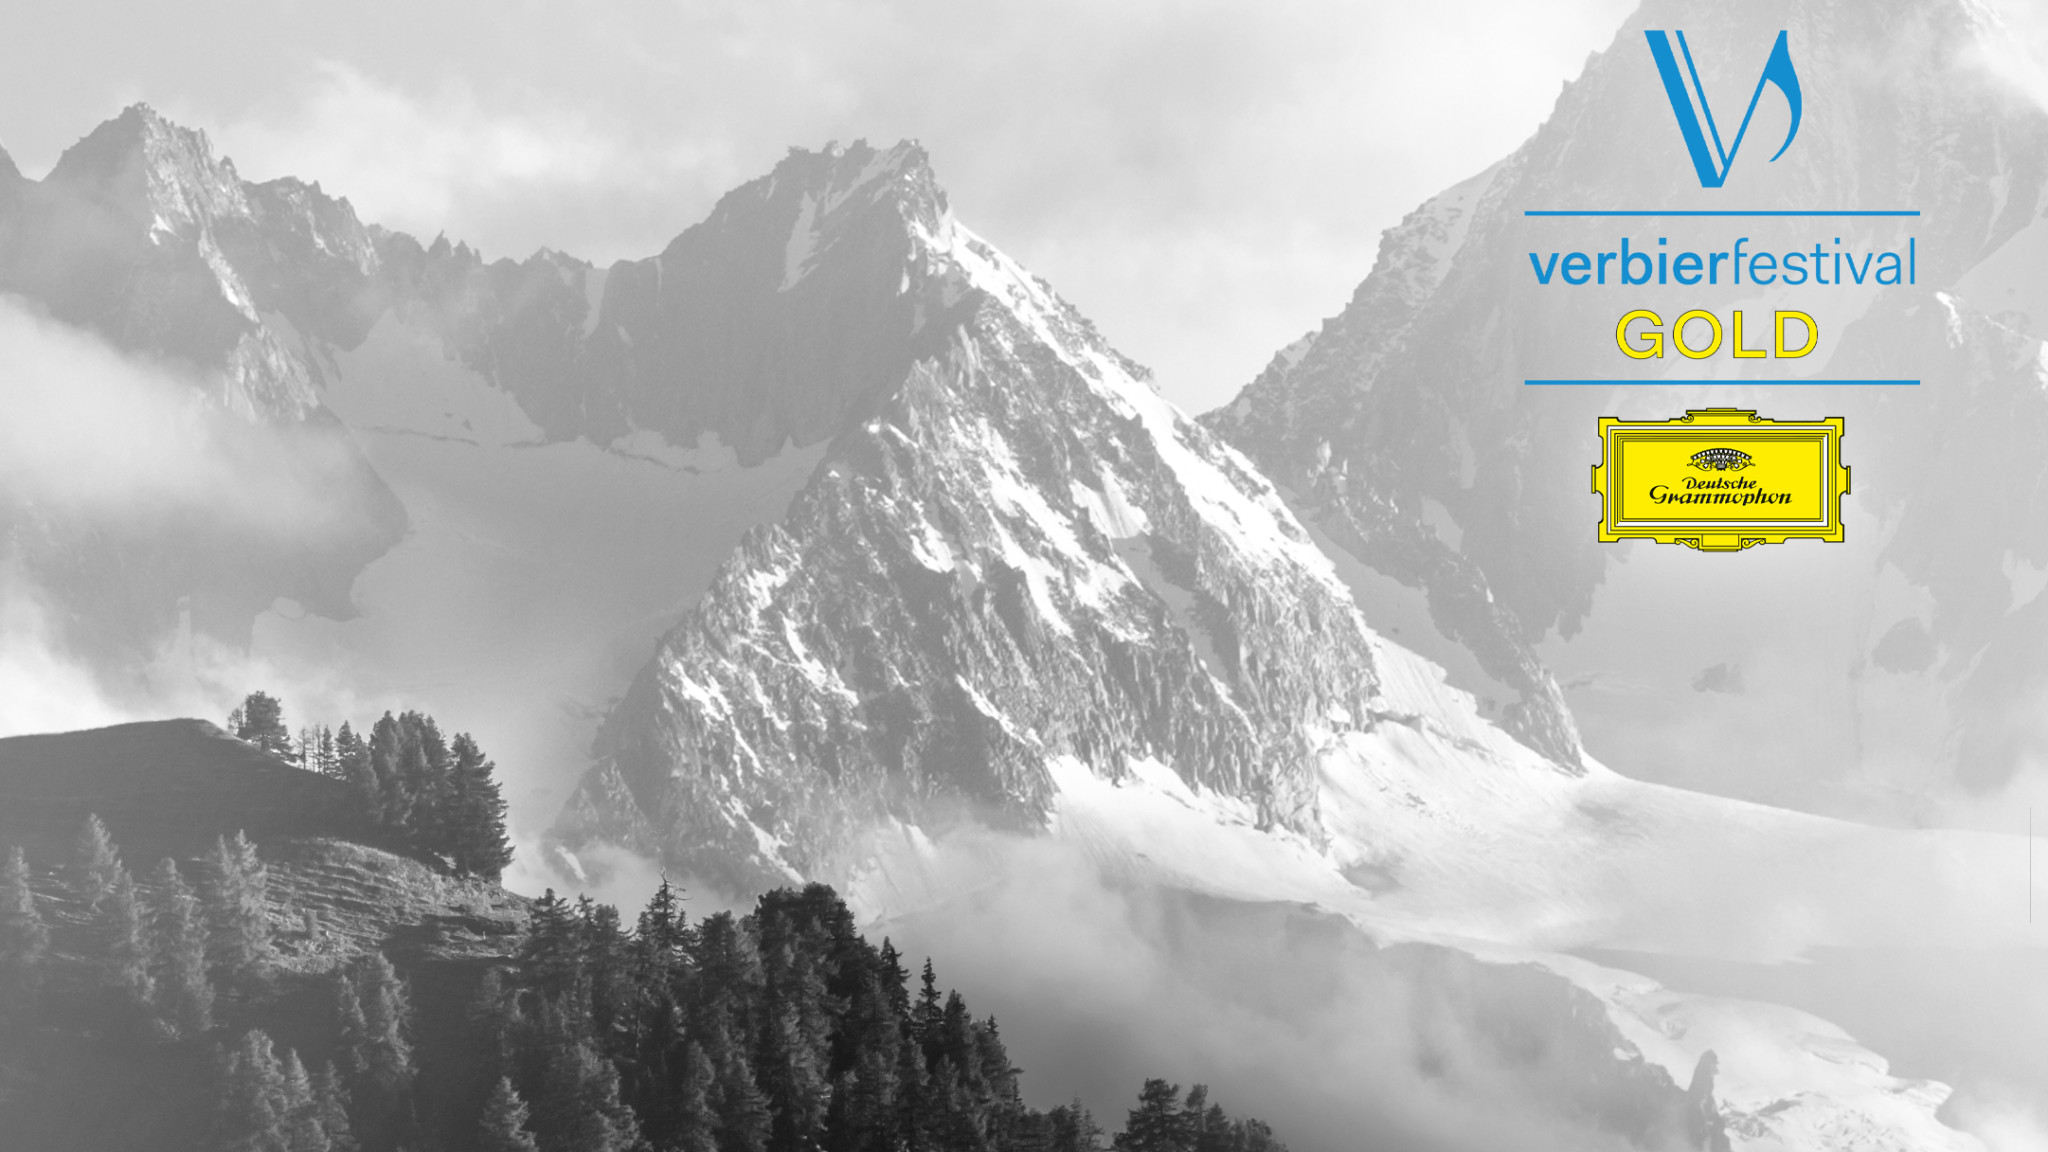 Introducing Verbier Festival Gold - A Joint Label from the Verbier Festival and Deutsche Grammophon